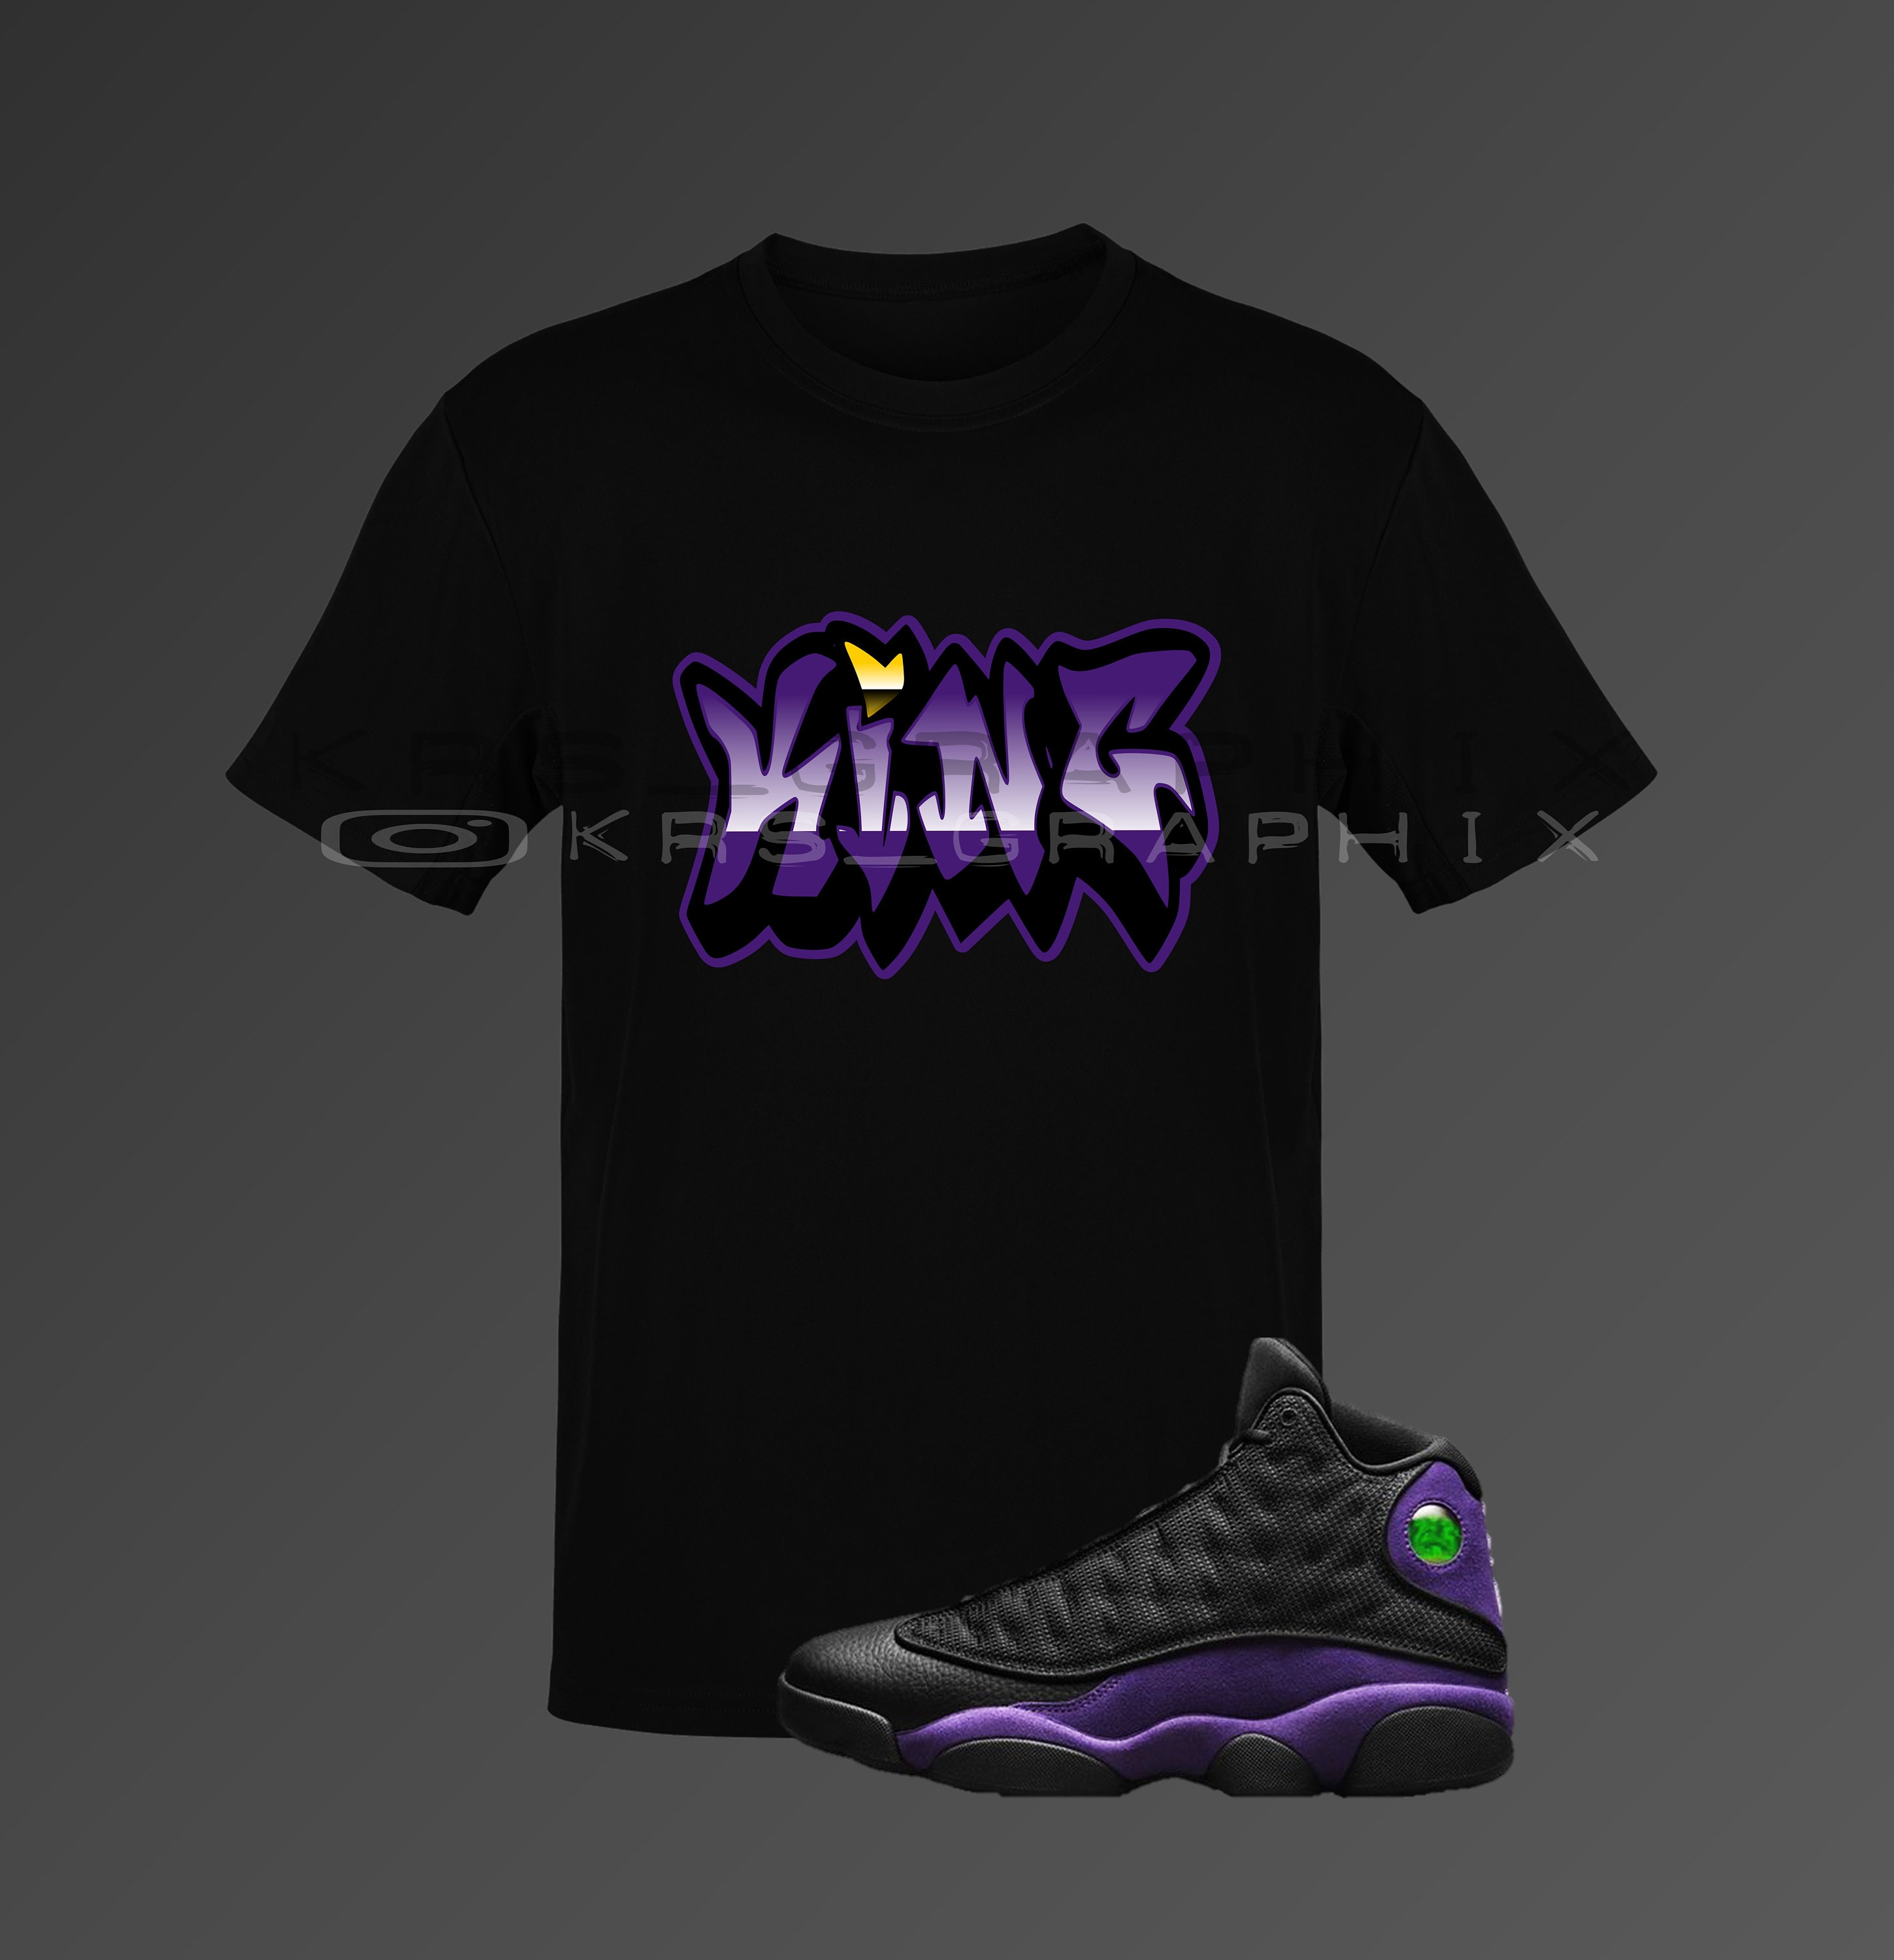 Jordan 13 kids sneaker lakers collection matches shirts designed for kids  to match the Jordan 13 lakers sneakers